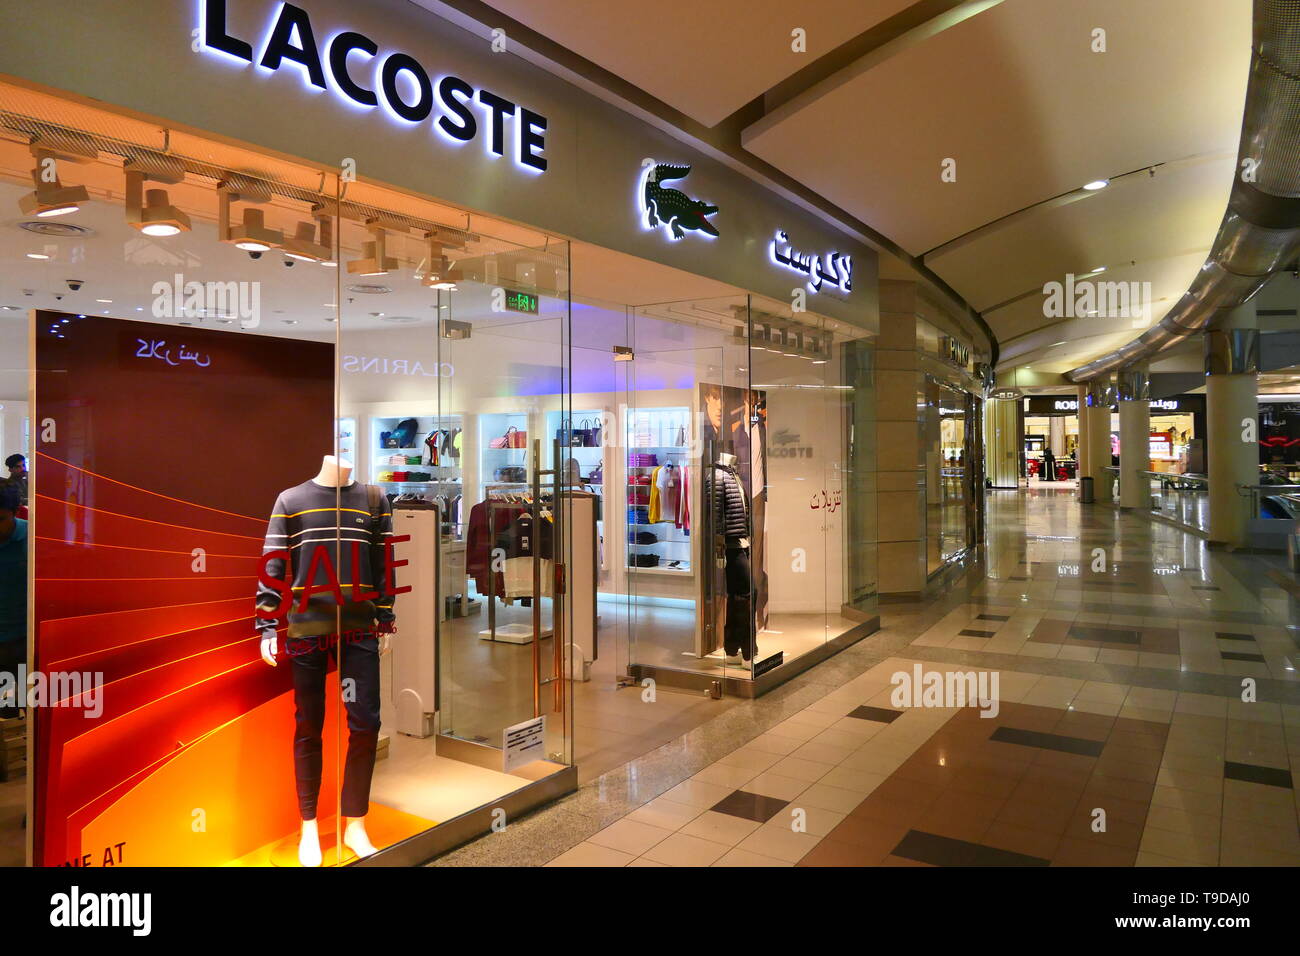 lacoste outlet mall near me